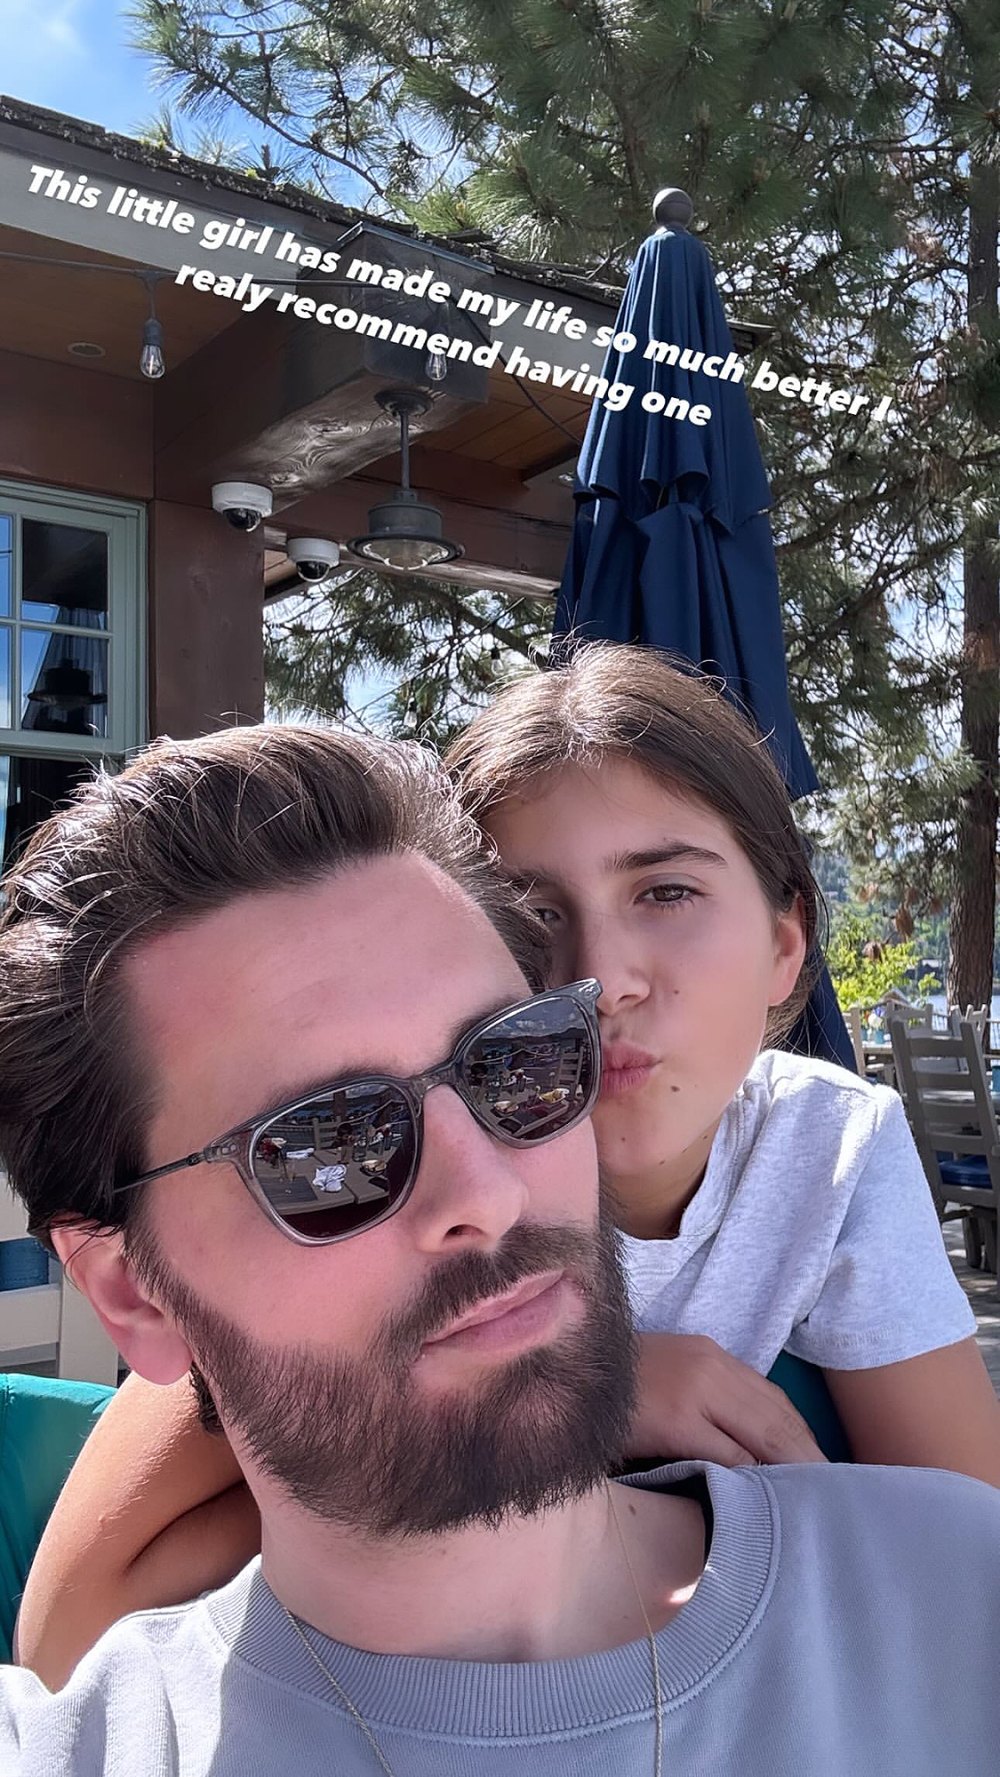 Scott Disick Gushes That Daughter Penelope, 11, Makes His 'Life So Much Better’